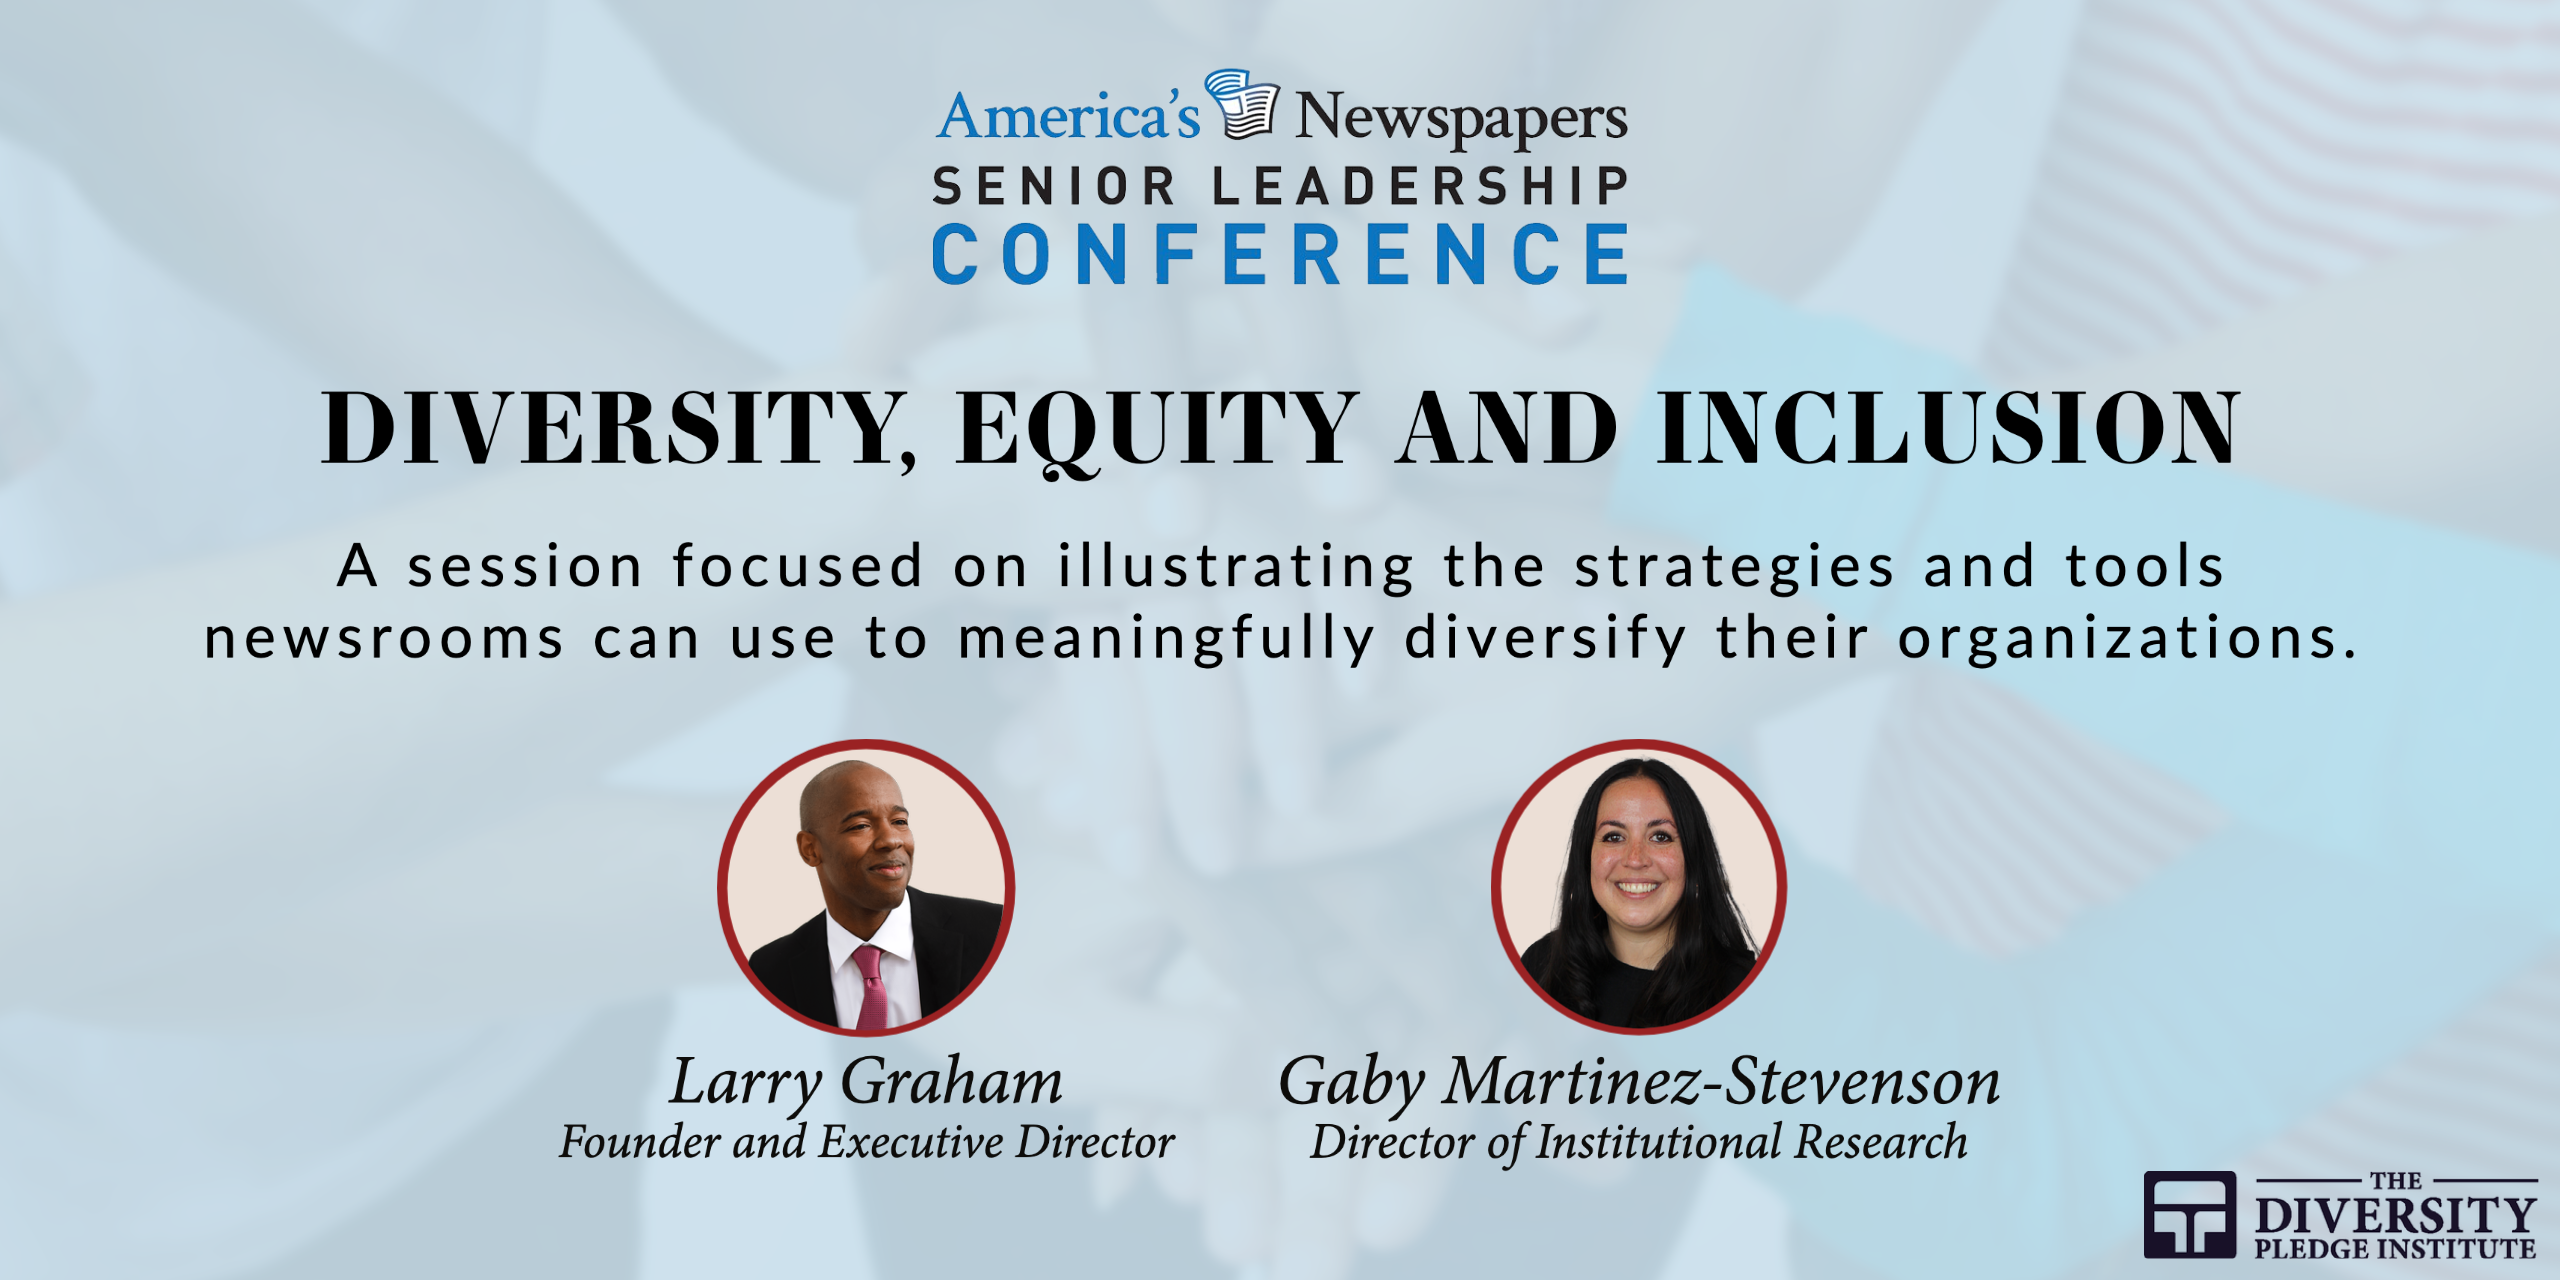 A graphic advertising a panel on Diversity, Equity and Inclusion by DPI Founder Larry Graham and the Director of Institutional Research Gaby Martinez-Stevenson at the Senior Leadership Conference for America's Newspapers.